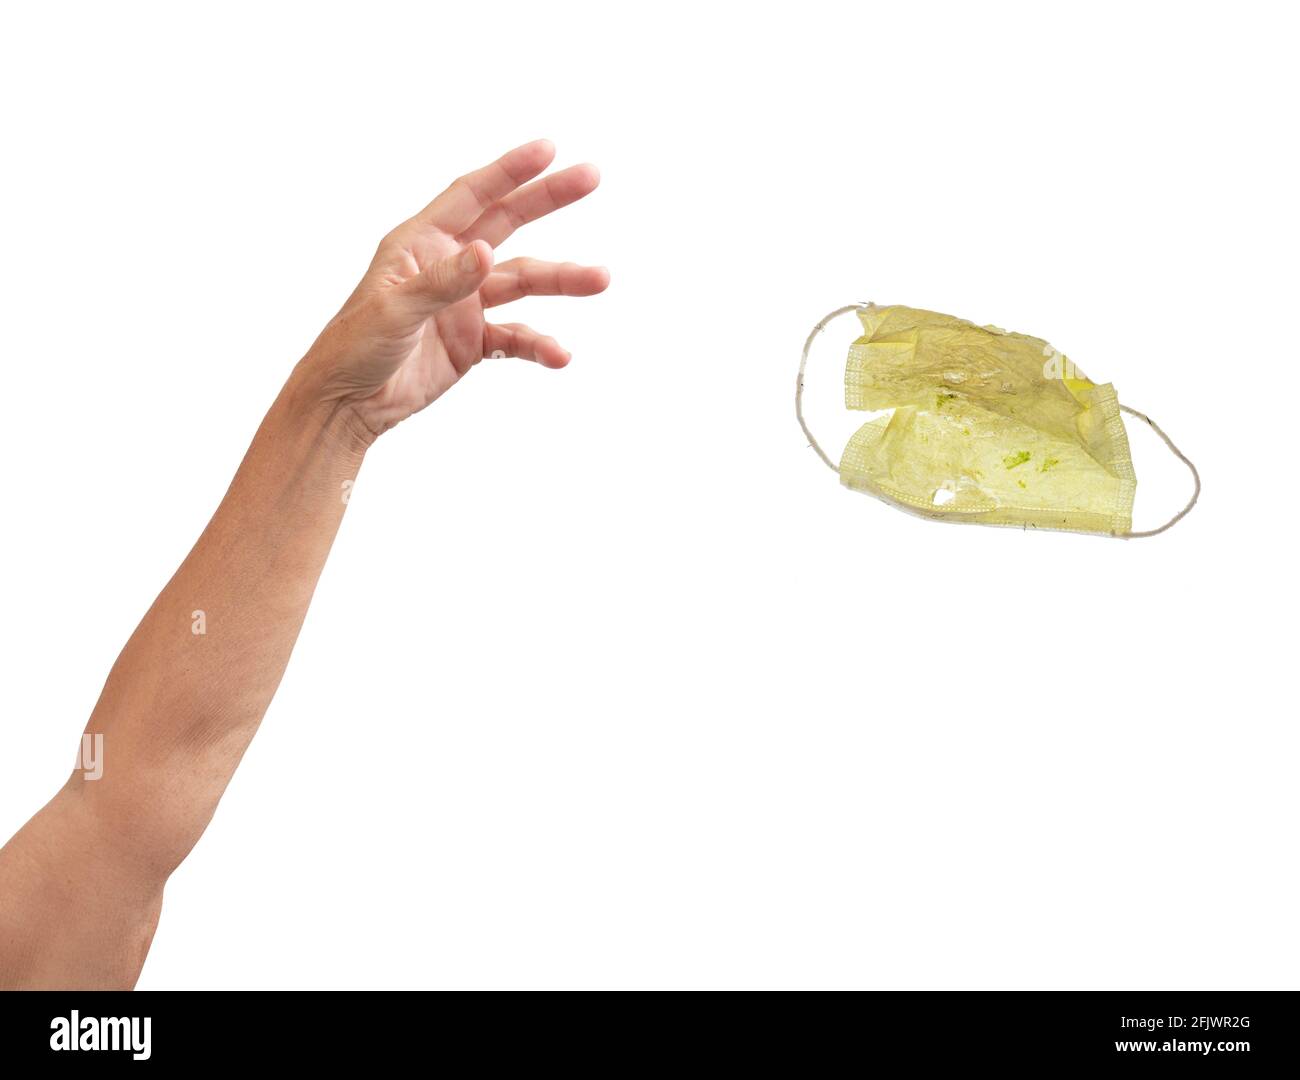 An arm throwing away a soiled yellow face mask. Stock Photo